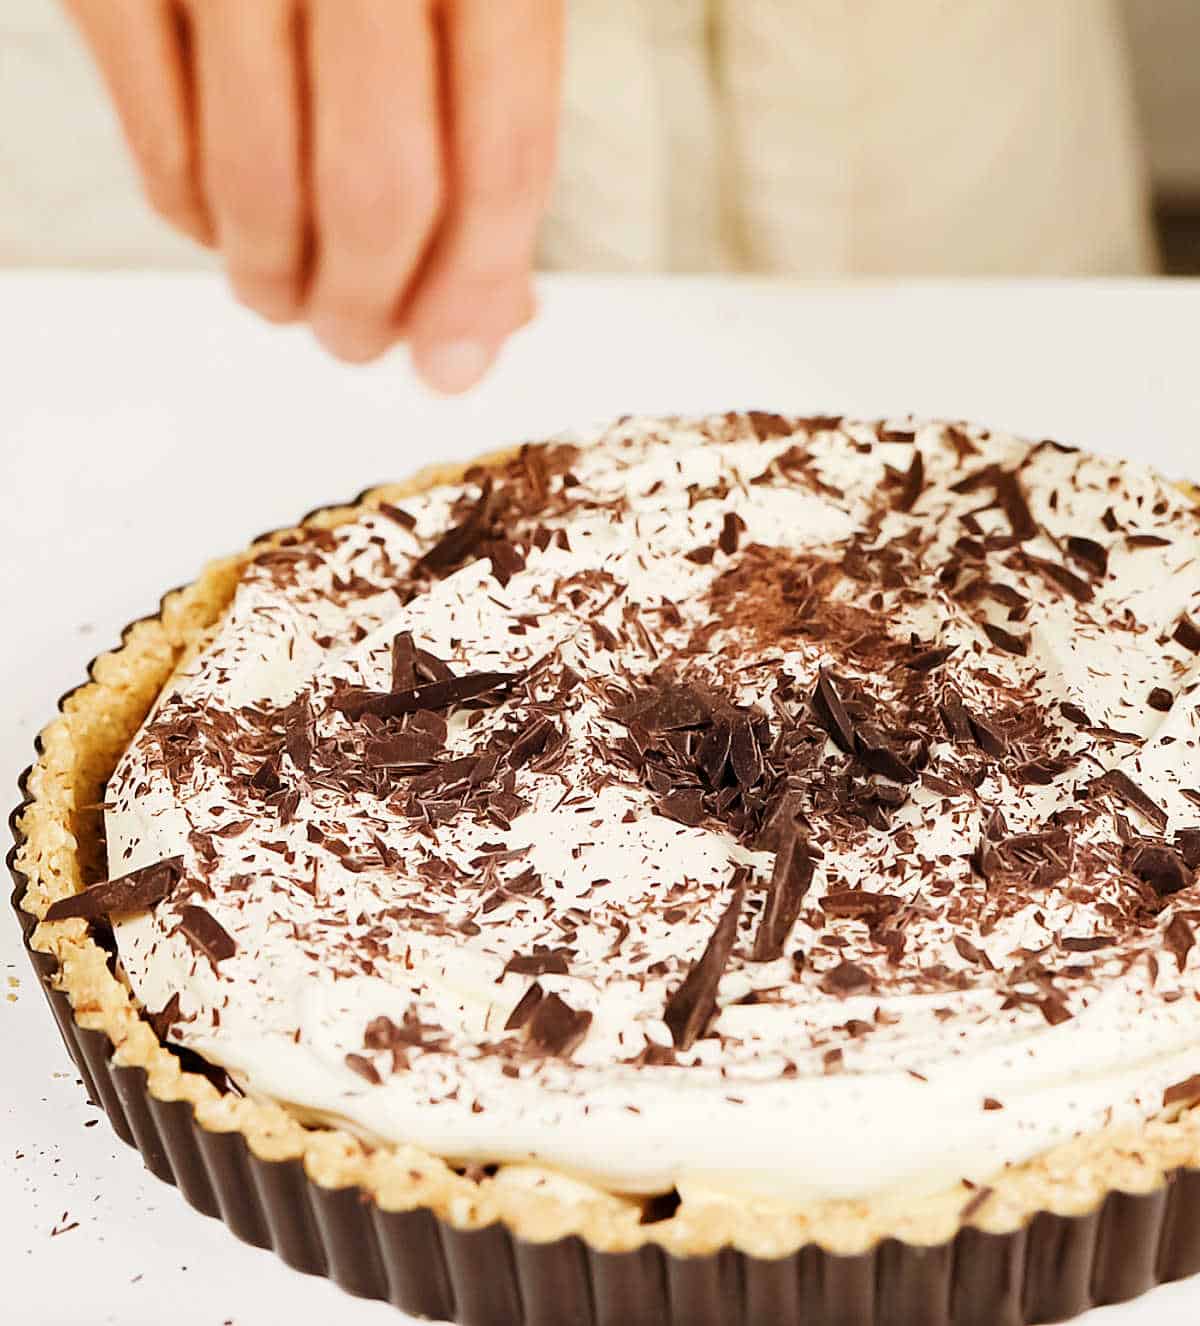 Hand sprinkling grated chocolate on whipped cream in pie pan on white surface